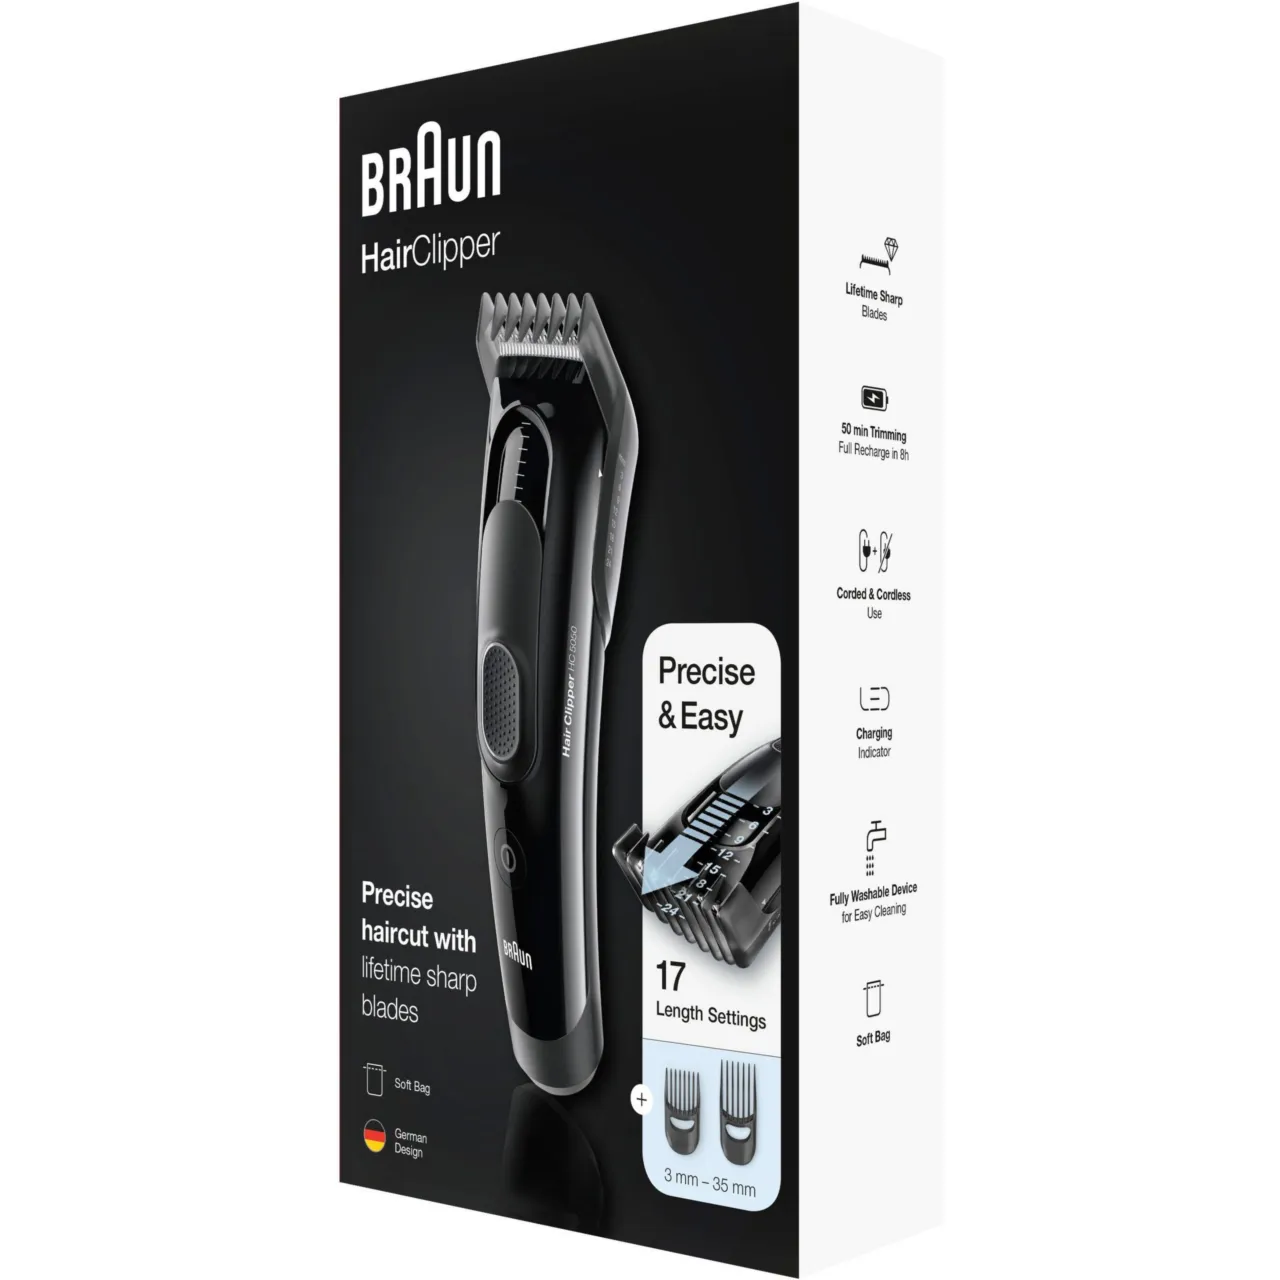 Braun Hair Clipper HC5090 Ultimate hair grooming experience from Braun in 17 lengths - 3